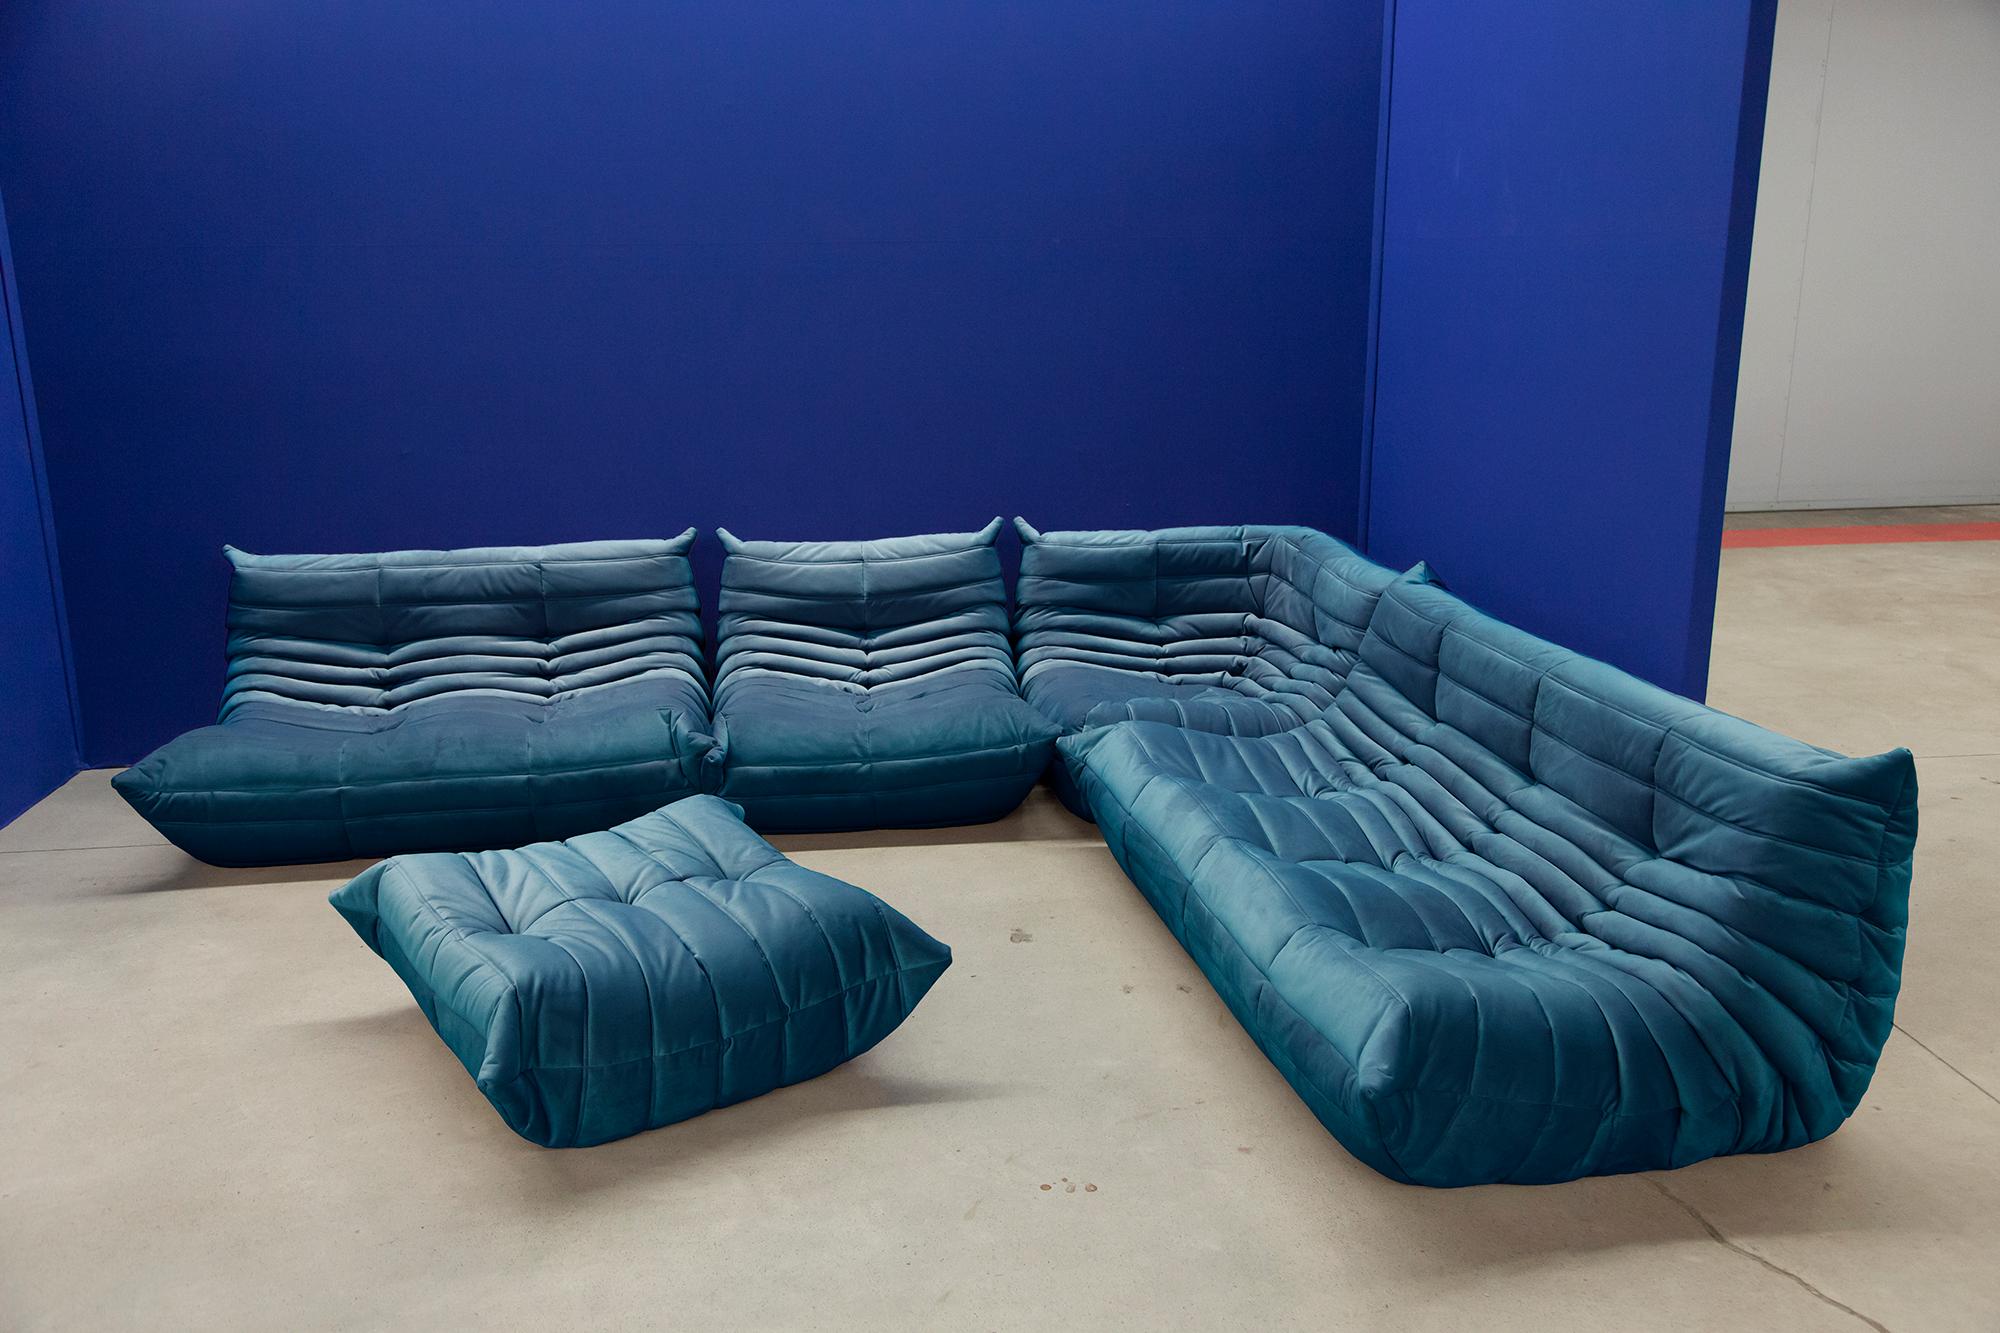 This Togo living room set was designed by Michel Ducaroy in 1973 and was manufactured by Ligne Roset in France. Each piece has the original Ligne Roset logo and genuine bottom. It has been reupholstered in genuine high quality turquoise/blue velvet